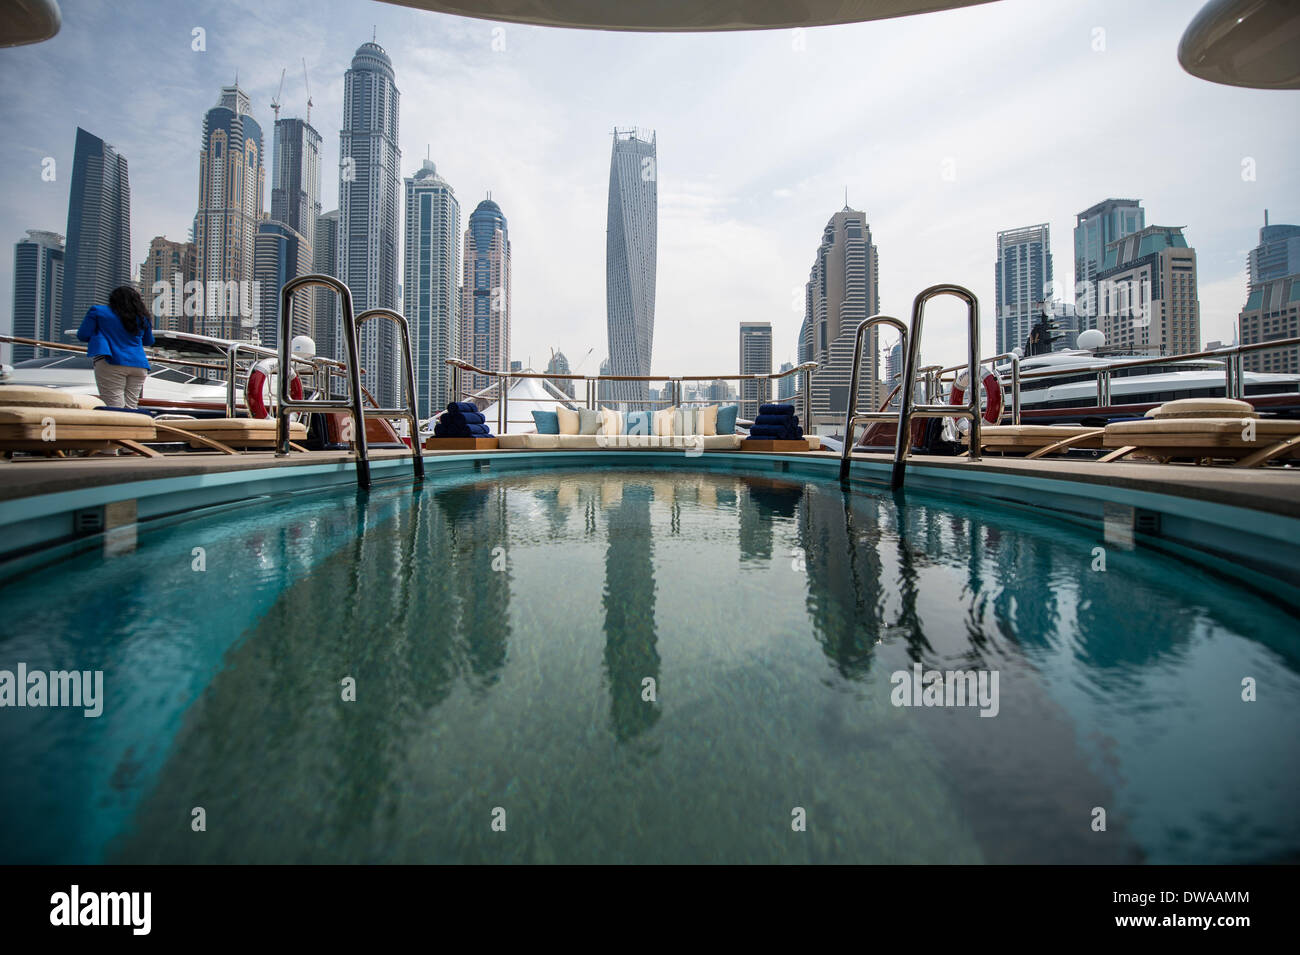 Dubai, United Arab Emirates. 4th Mar, 2014. Skyscrapers in Dubai Marina area are reflected by the water in a pool on the 88.5-meter-long Oceanco's Nirvana yacht which is the largest luxury yacht ever displayed in Dubai, on the Dubai international Boat Show 2014 held at the Dubai International Marine Club, Dubai, the United Arab Emirates, on March 4, 2014. The show starting on Tuesday has 430 boats worth 1.8 billion Dirham or 490.8 million dollars on display amid rising interest from wealthy yacht aficionados from abroad. © Pan Chaoyue/Xinhua/Alamy Live News Stock Photo